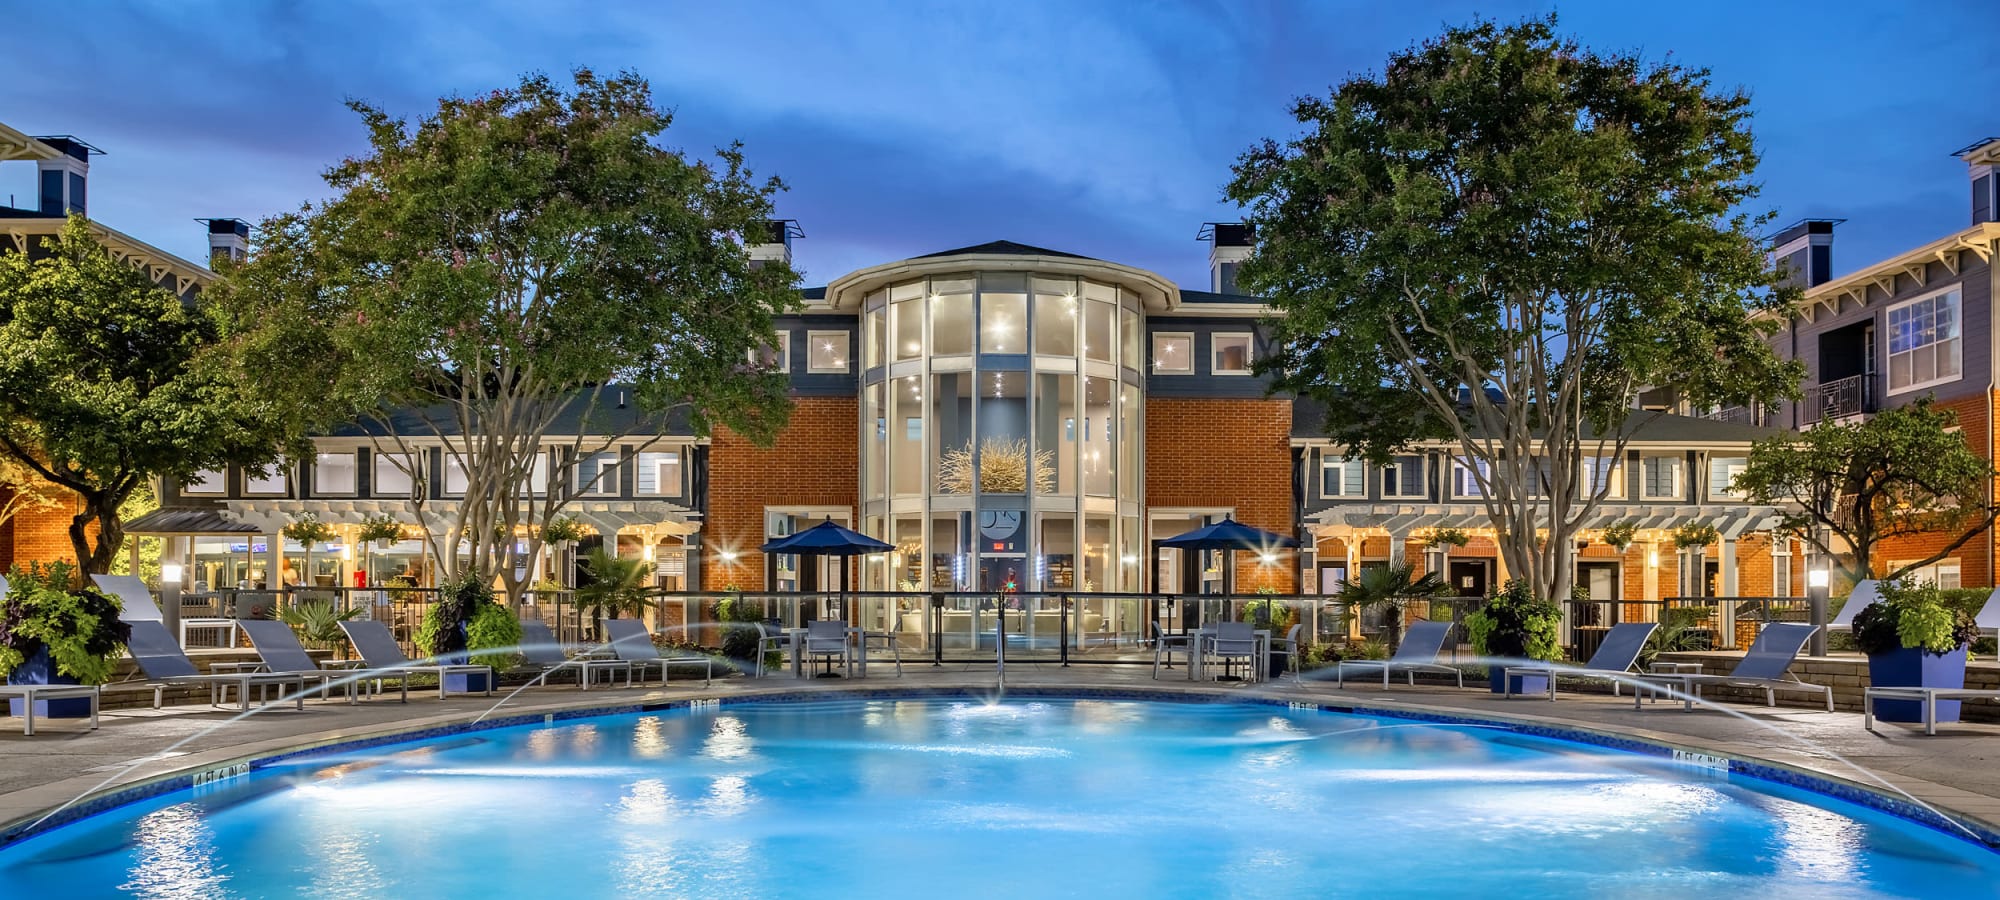 Schedule a tour of Marquis on Gaston in Dallas, Texas